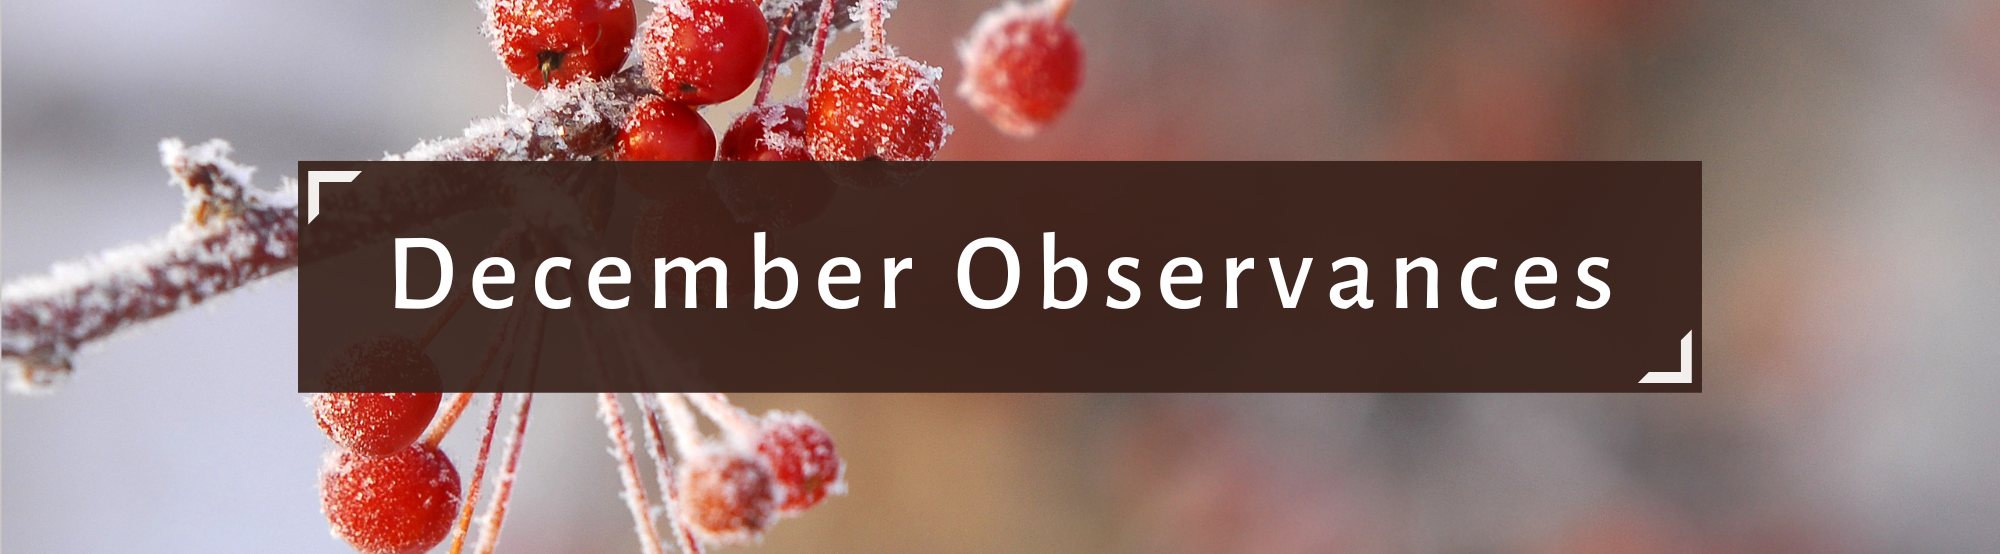 Image of red berries on a branch with the text December Observances